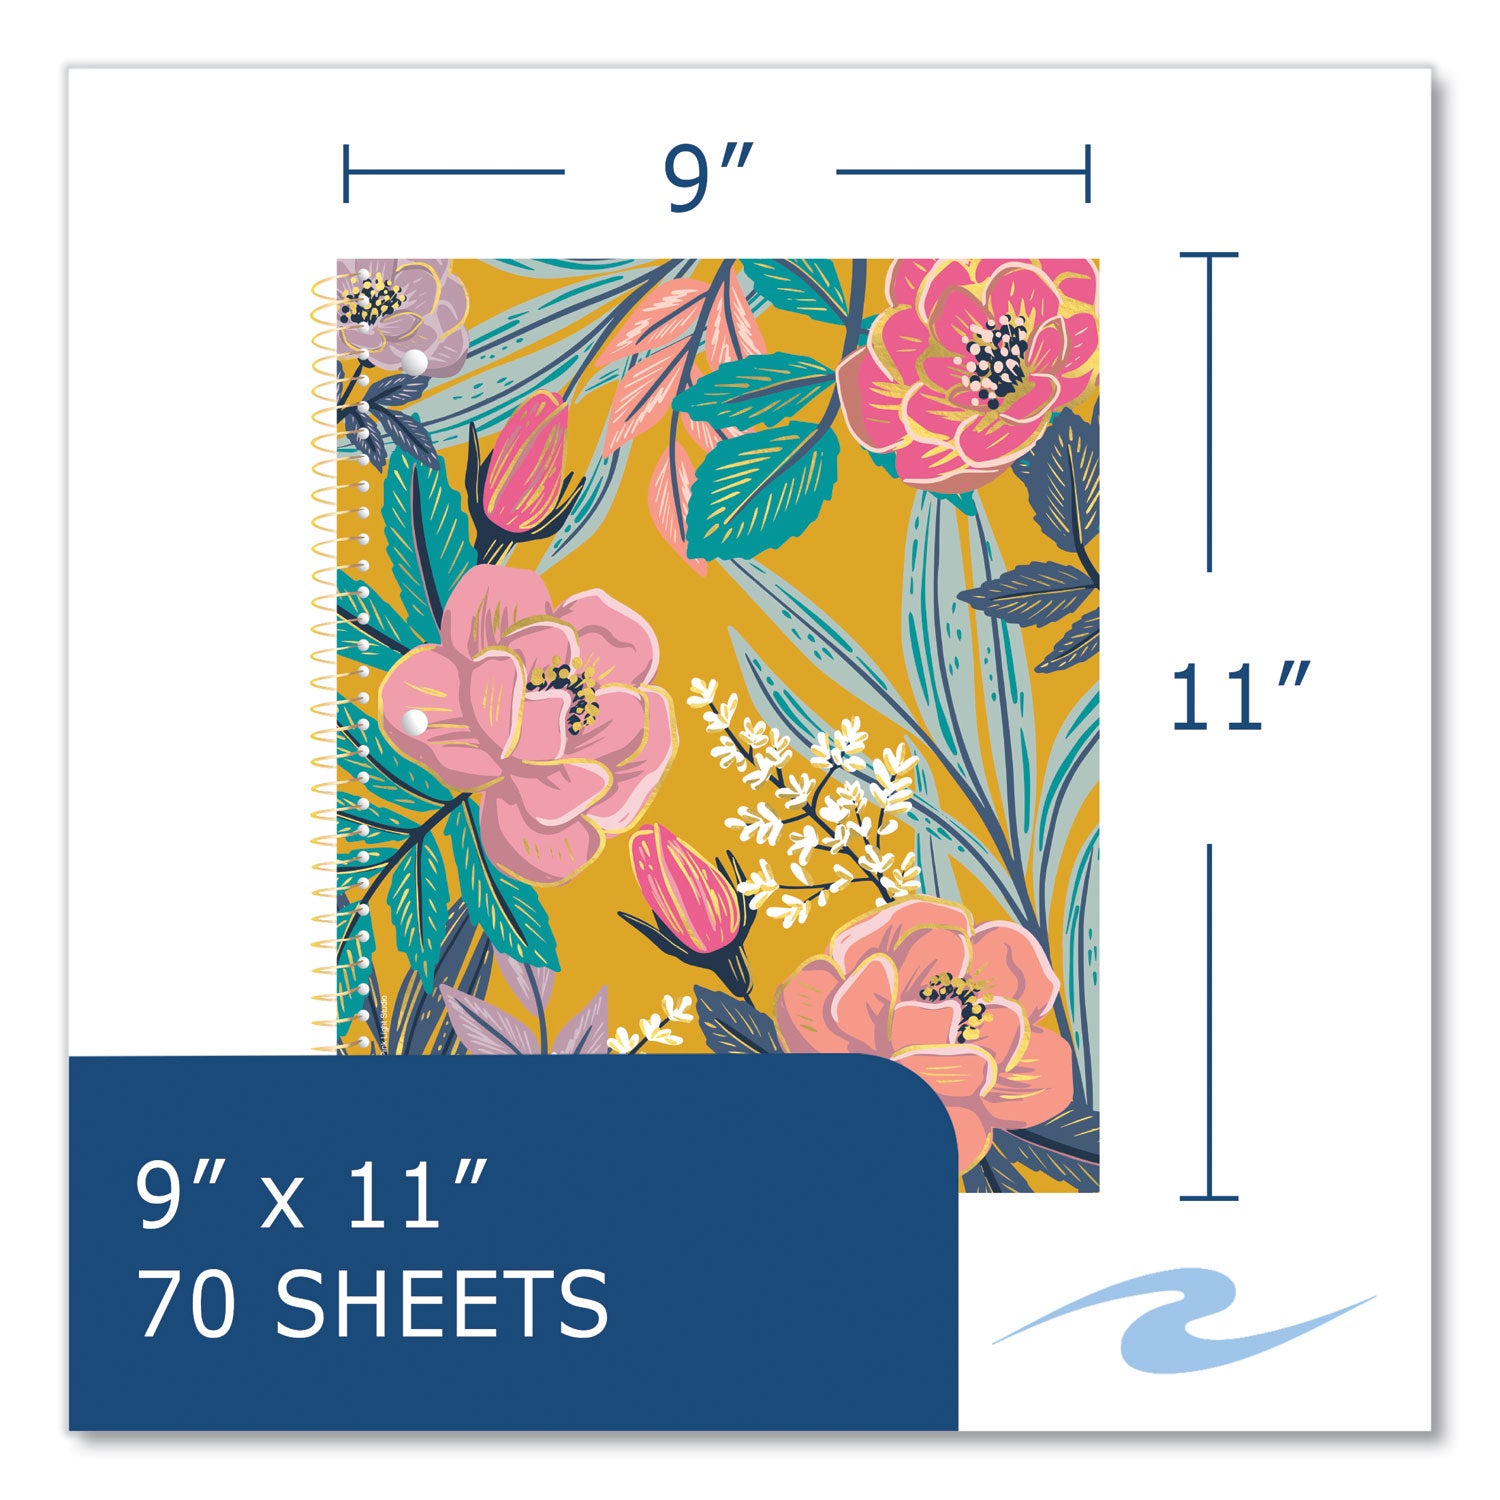 studio-series-notebook-1-subject-college-rule-assorted-covers-set-2-70-11-x-9-sheets-24-ct-ships-in-4-6-business-days_roa11322cs - 7